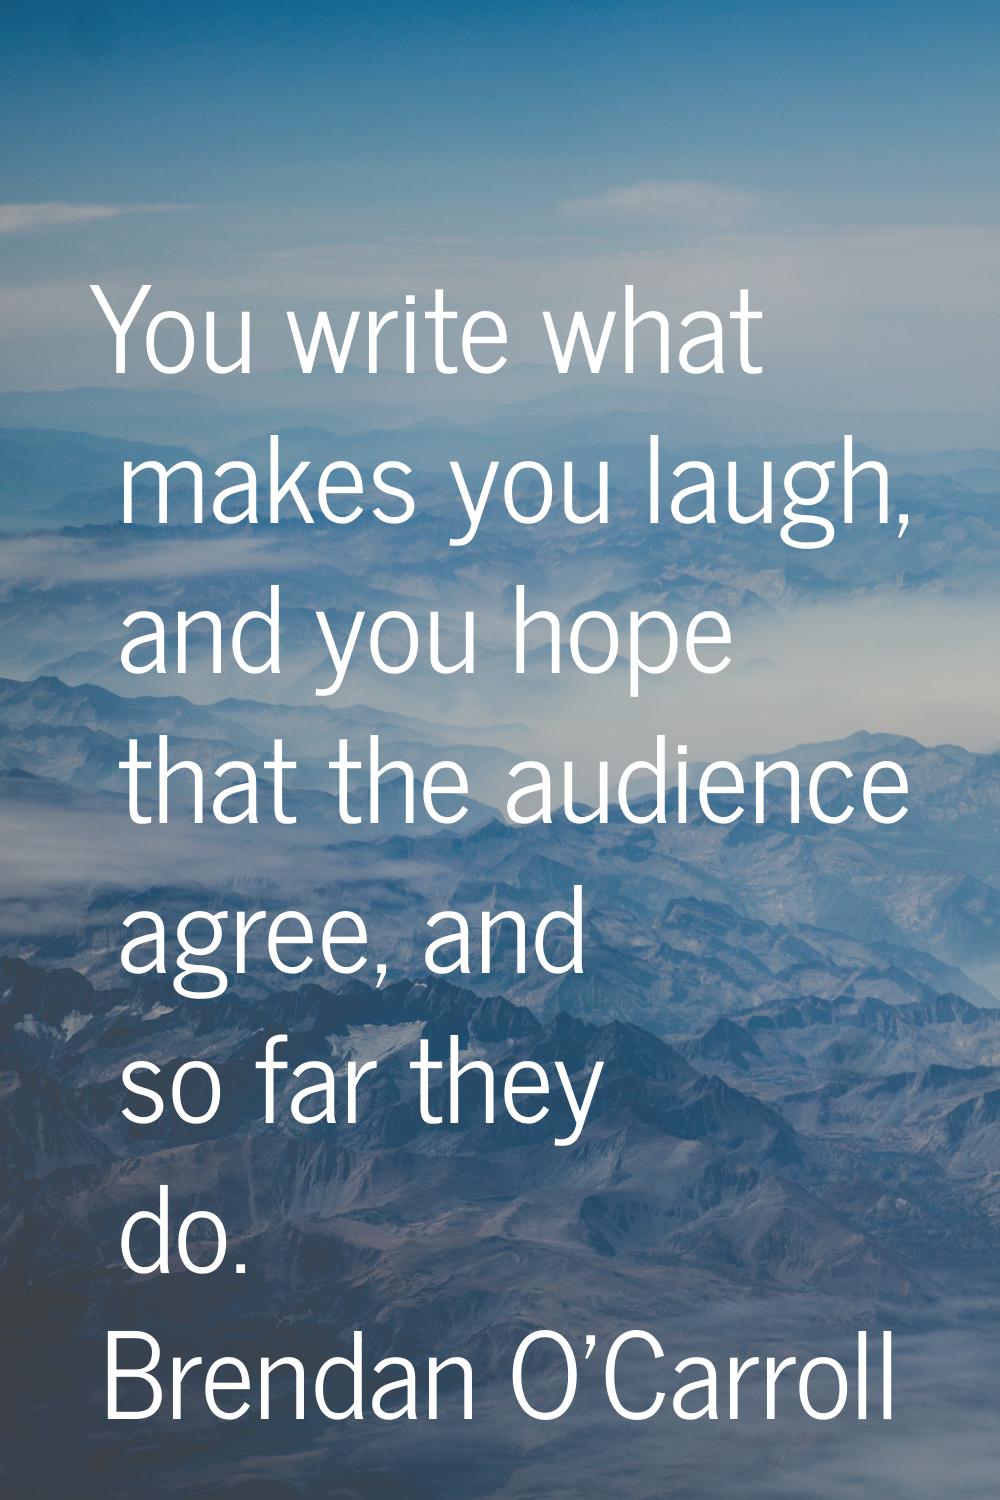 You write what makes you laugh, and you hope that the audience agree, and so far they do.